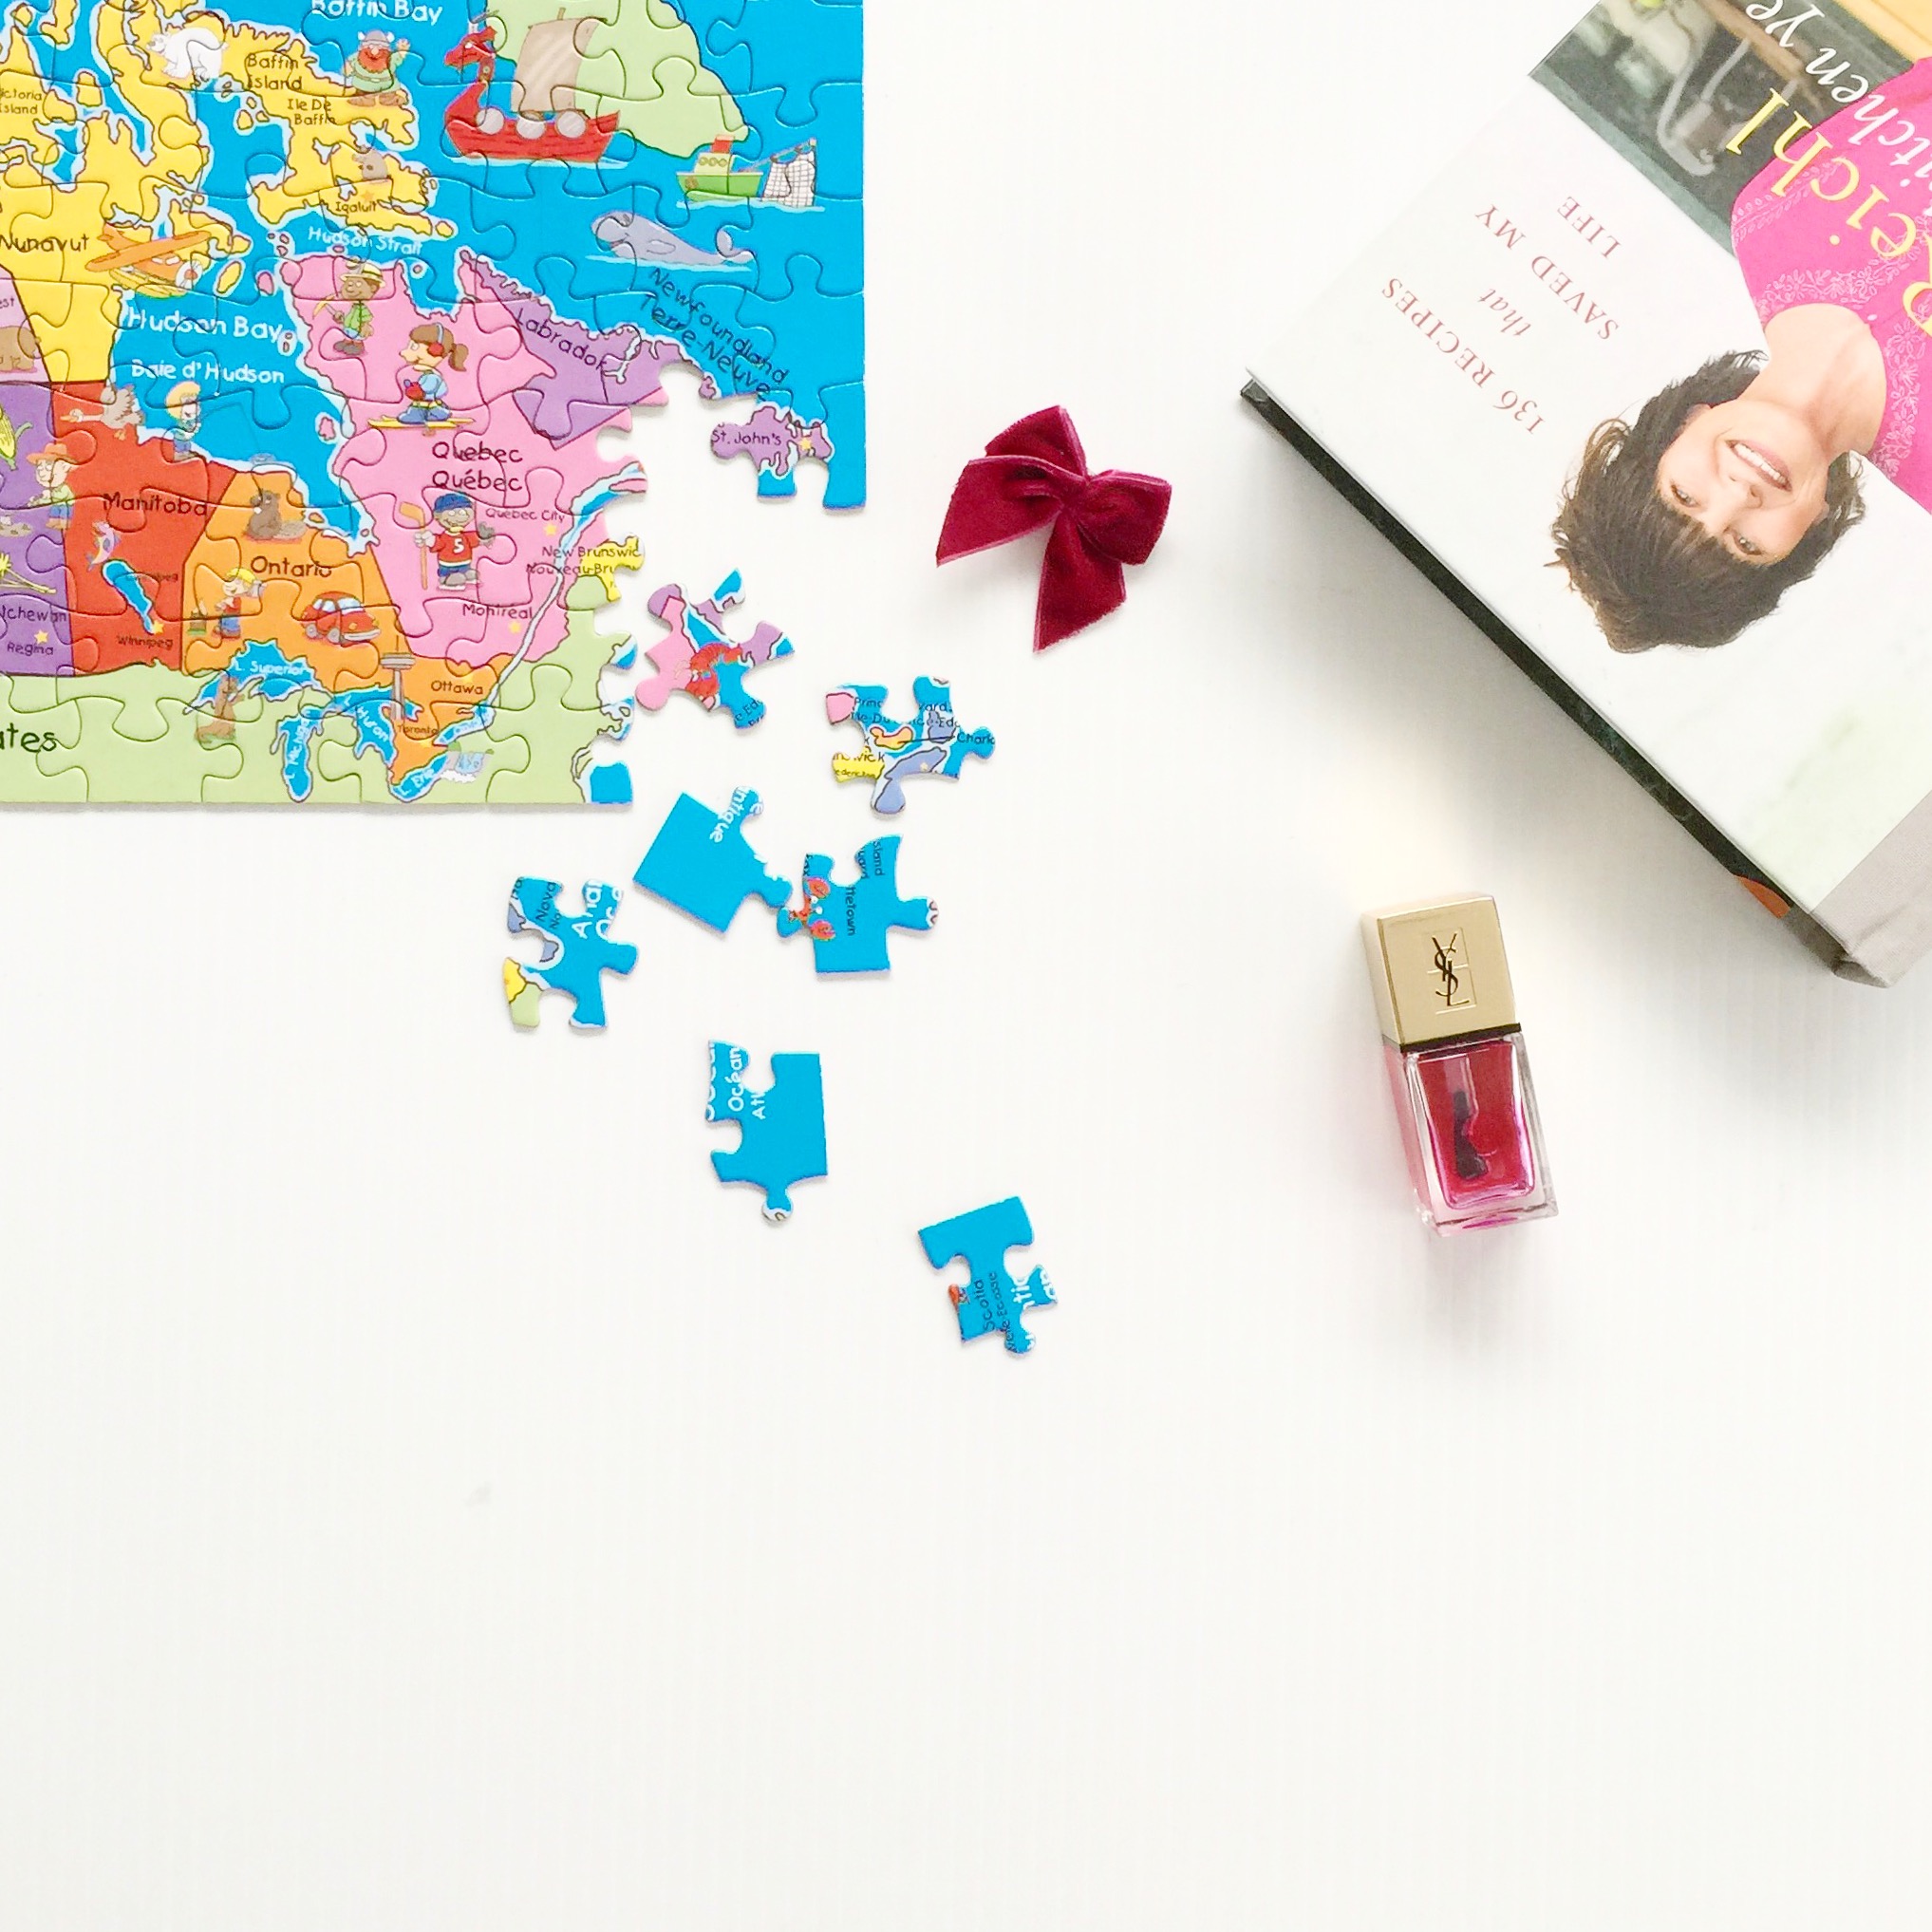 a map puzzle and ruth reichl's new book on a white background